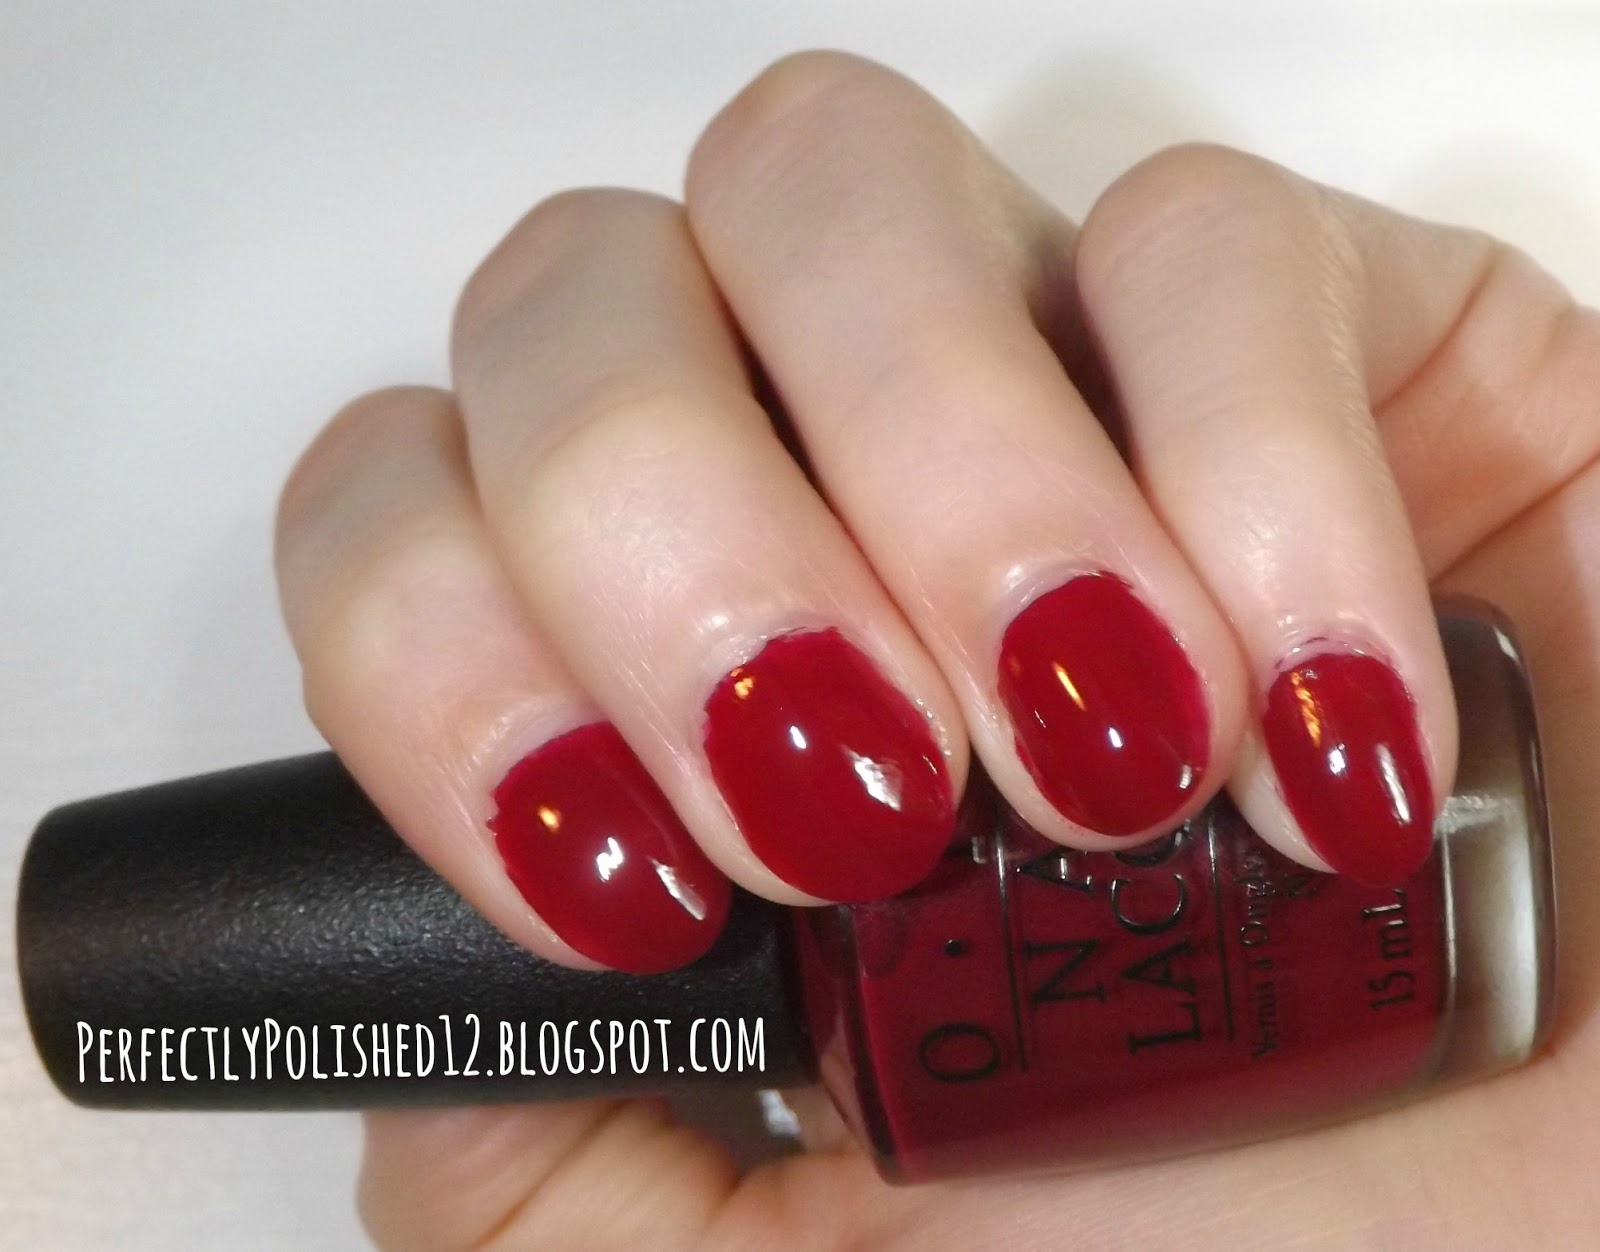 1. OPI Nail Lacquer in "Malaga Wine" - wide 2